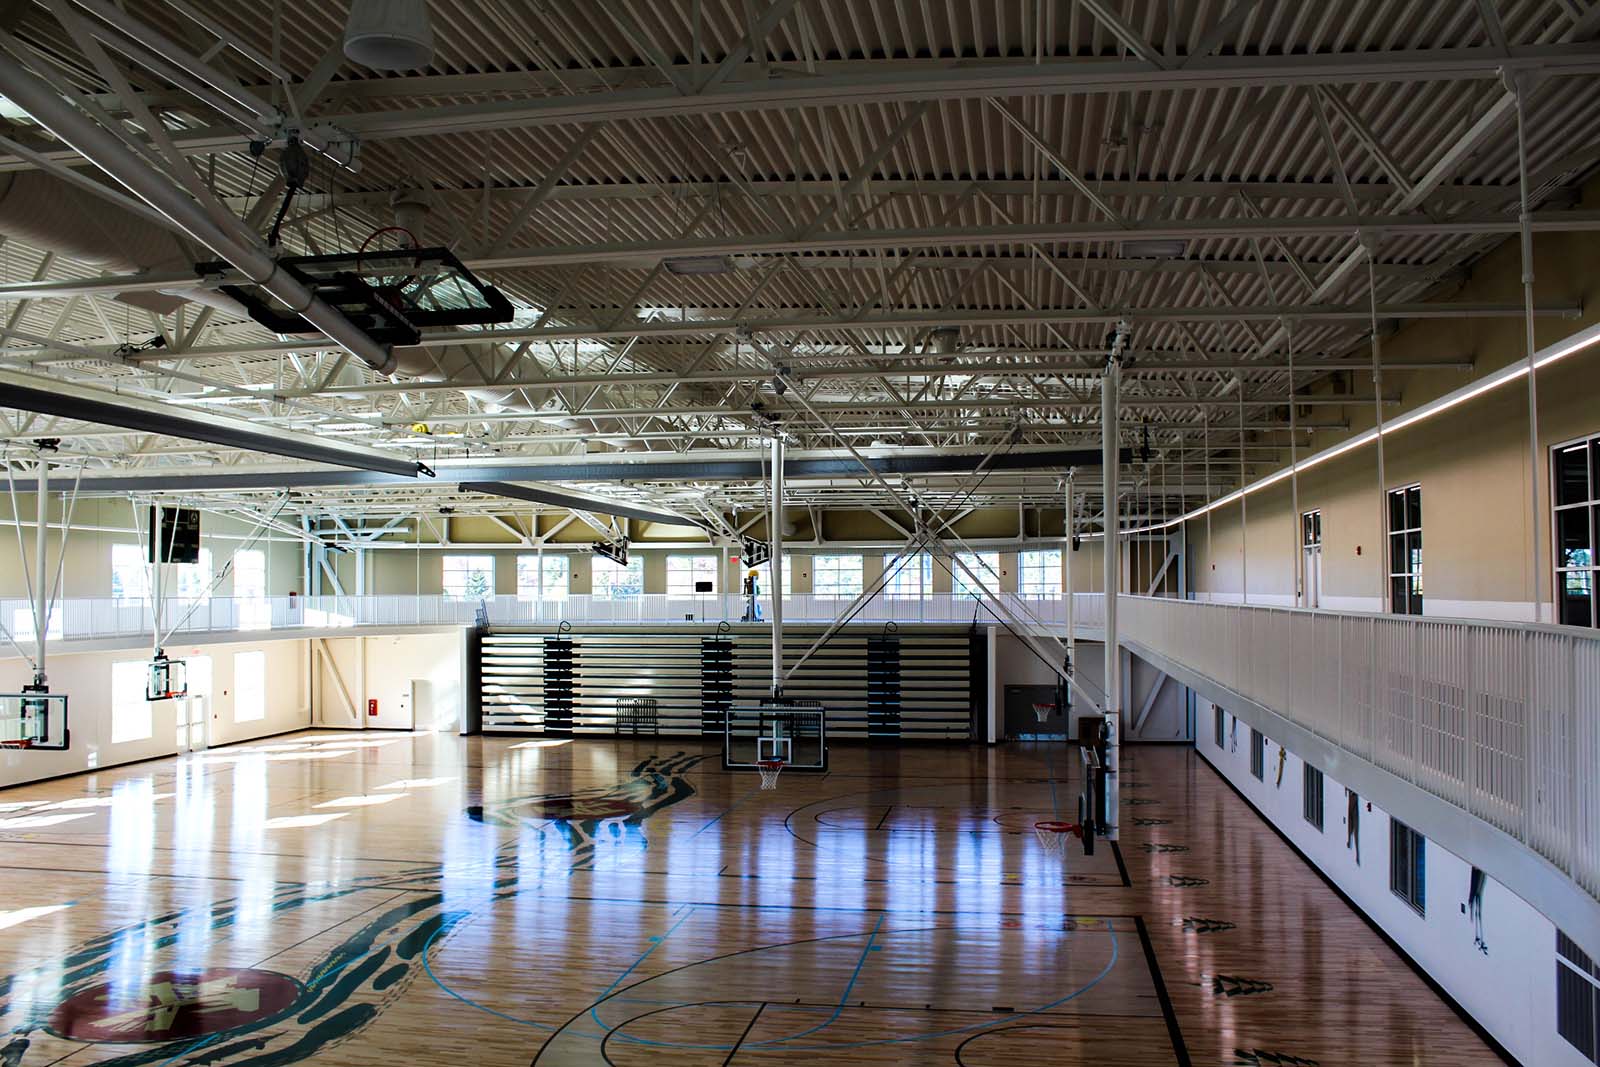 two NCAA regulation-size basketball courts that can be divided into smaller practice areas